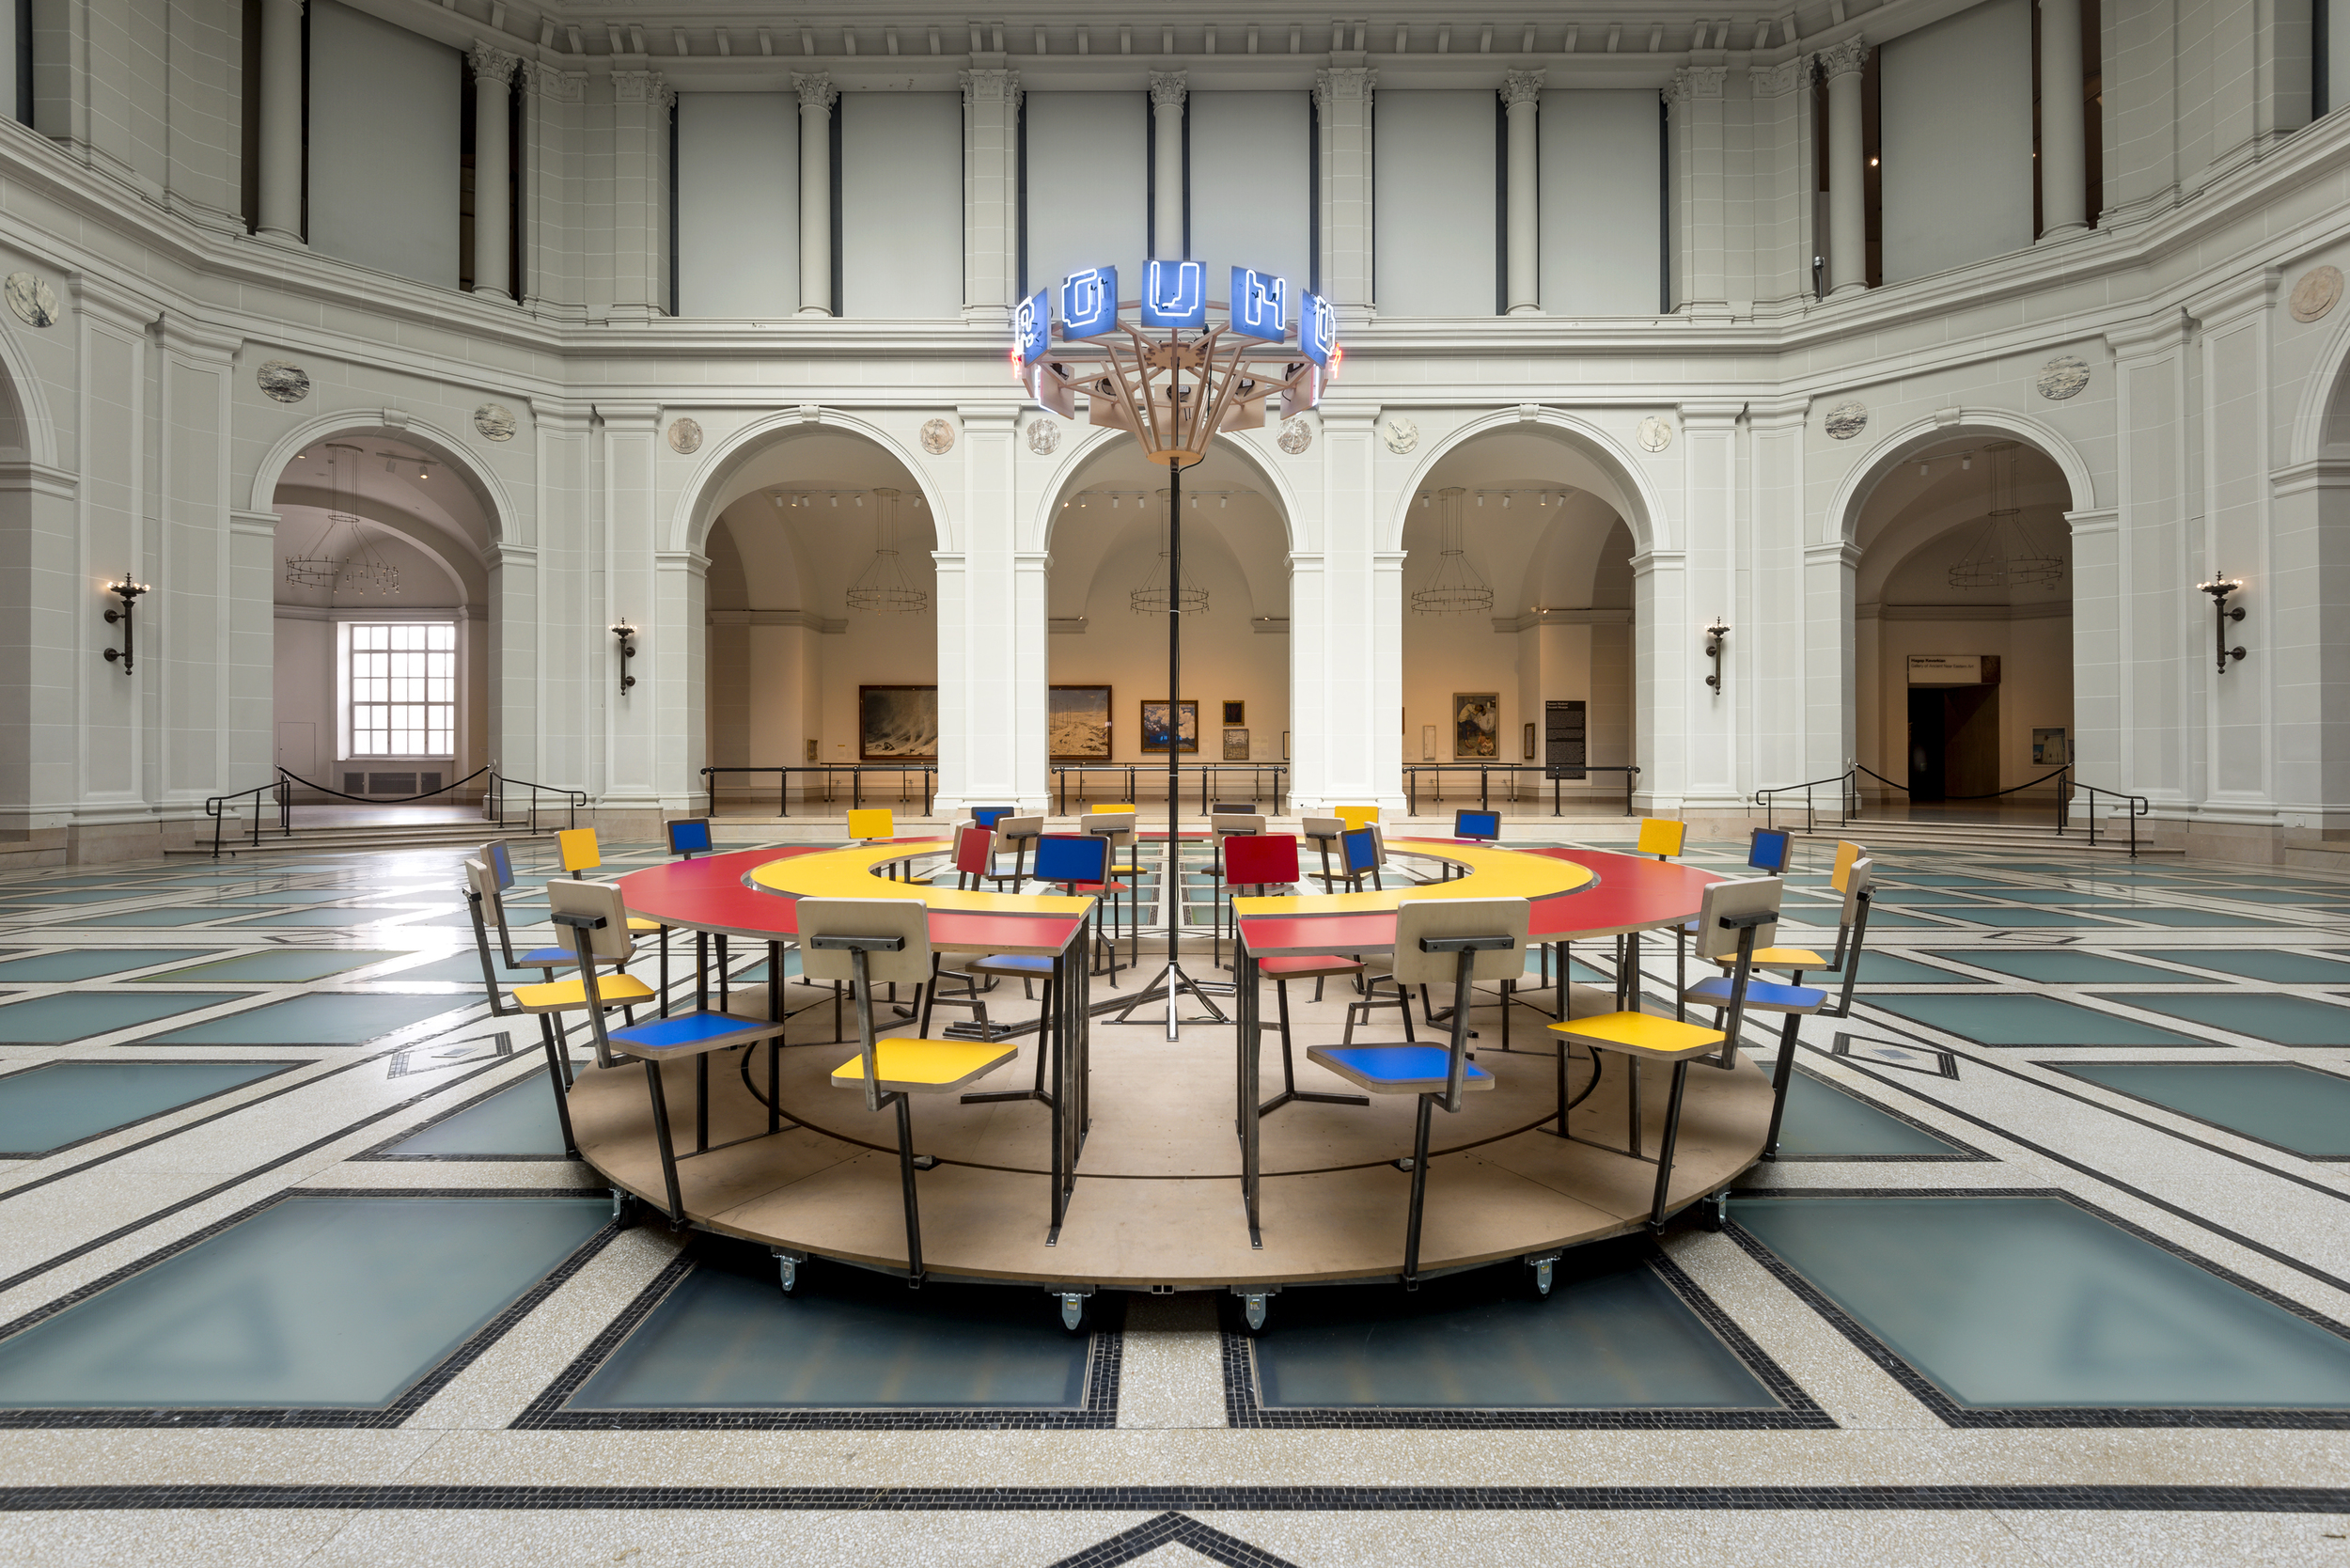   Until the Cows Come Home  (2014), as installed at the Brooklyn Museum in 2014. Steel, neon, laminated mdf, pine; 60 x 168 in. (table), 24 x 60 in. (neon centerpiece). ( photo : Giles Ashford) 